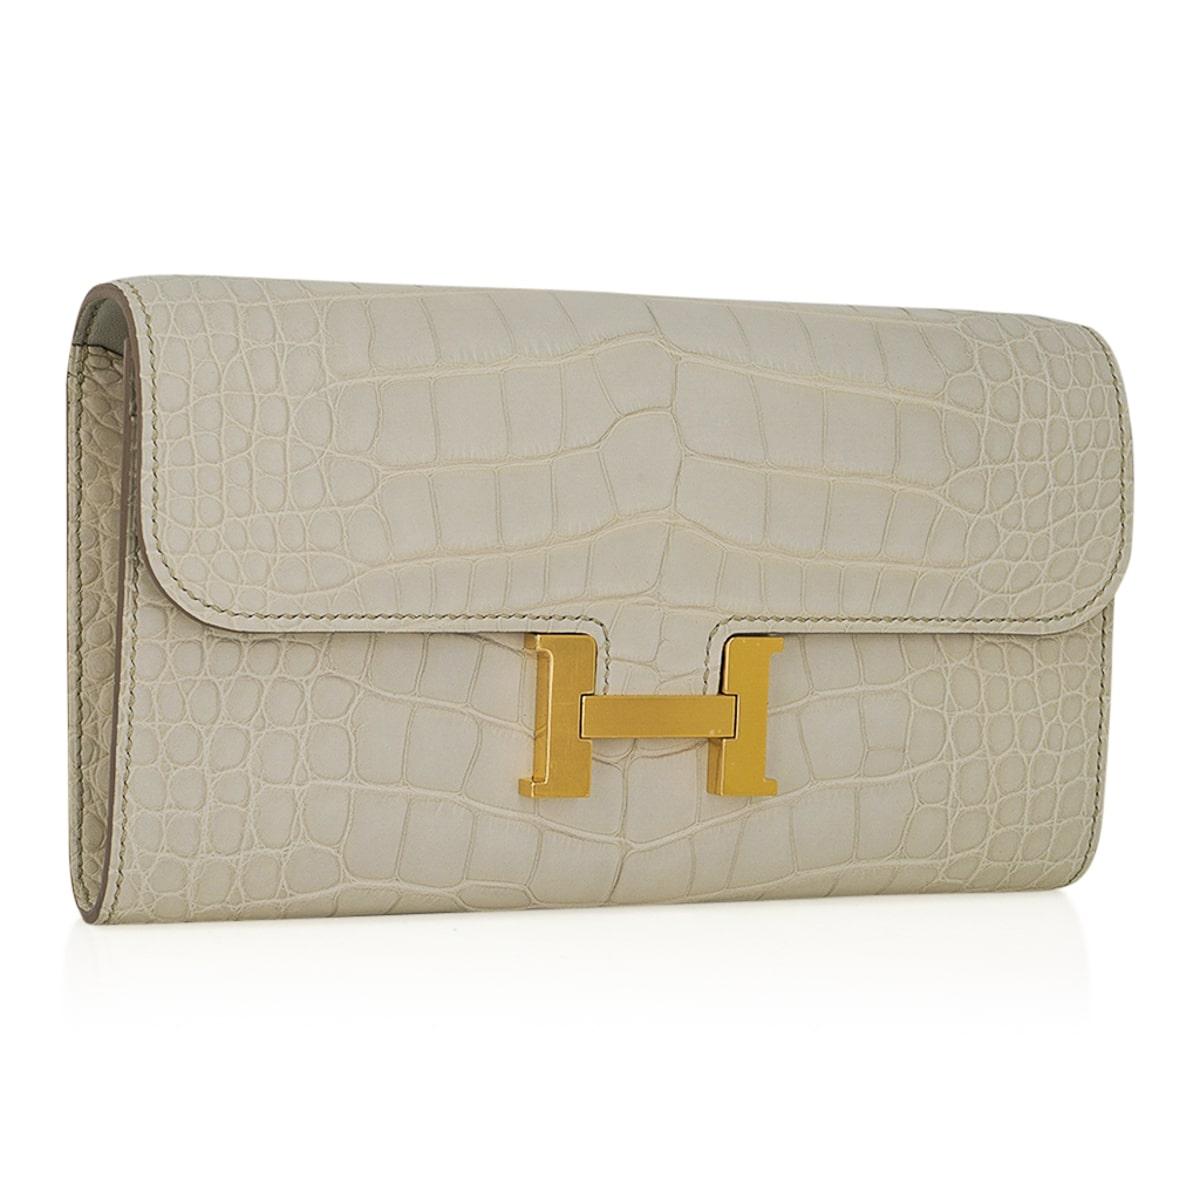 Mightychic offers an Hermes Constance LongTo Go Wallet featured in coveted Beton Matte Alligator.
This stunning neutral Constance To Go is accentuated with Gold hardware.
Detachable crossbody / shoulder strap converts this gorgeous Constance Long To